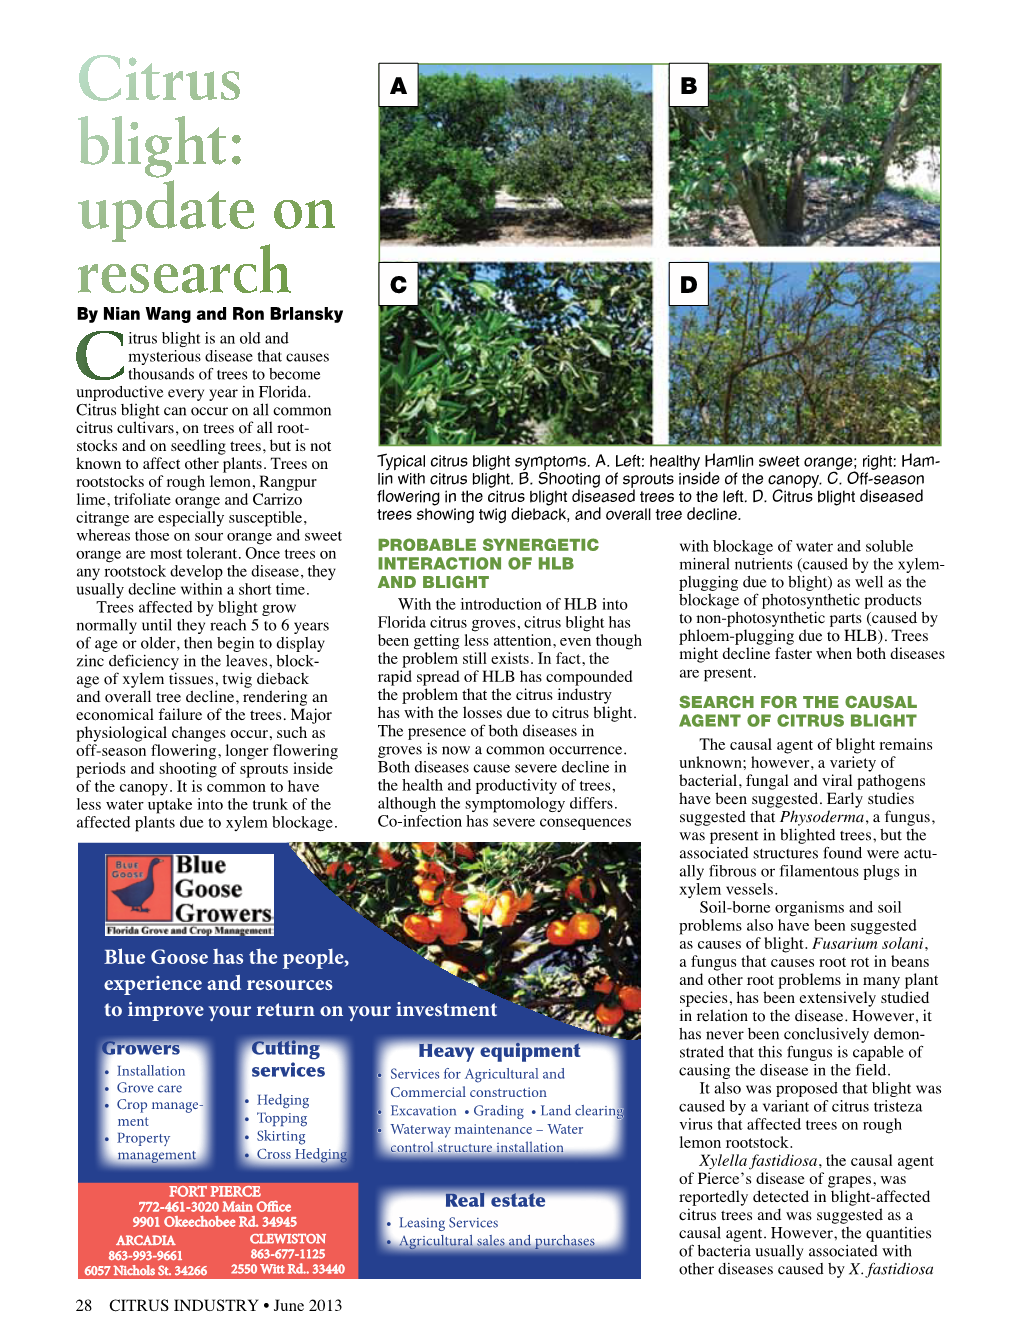 Citrus Blight Can Occur on All Common Citrus Cultivars, on Trees of All Root- Stocks and on Seedling Trees, but Is Not Known to Affect Other Plants